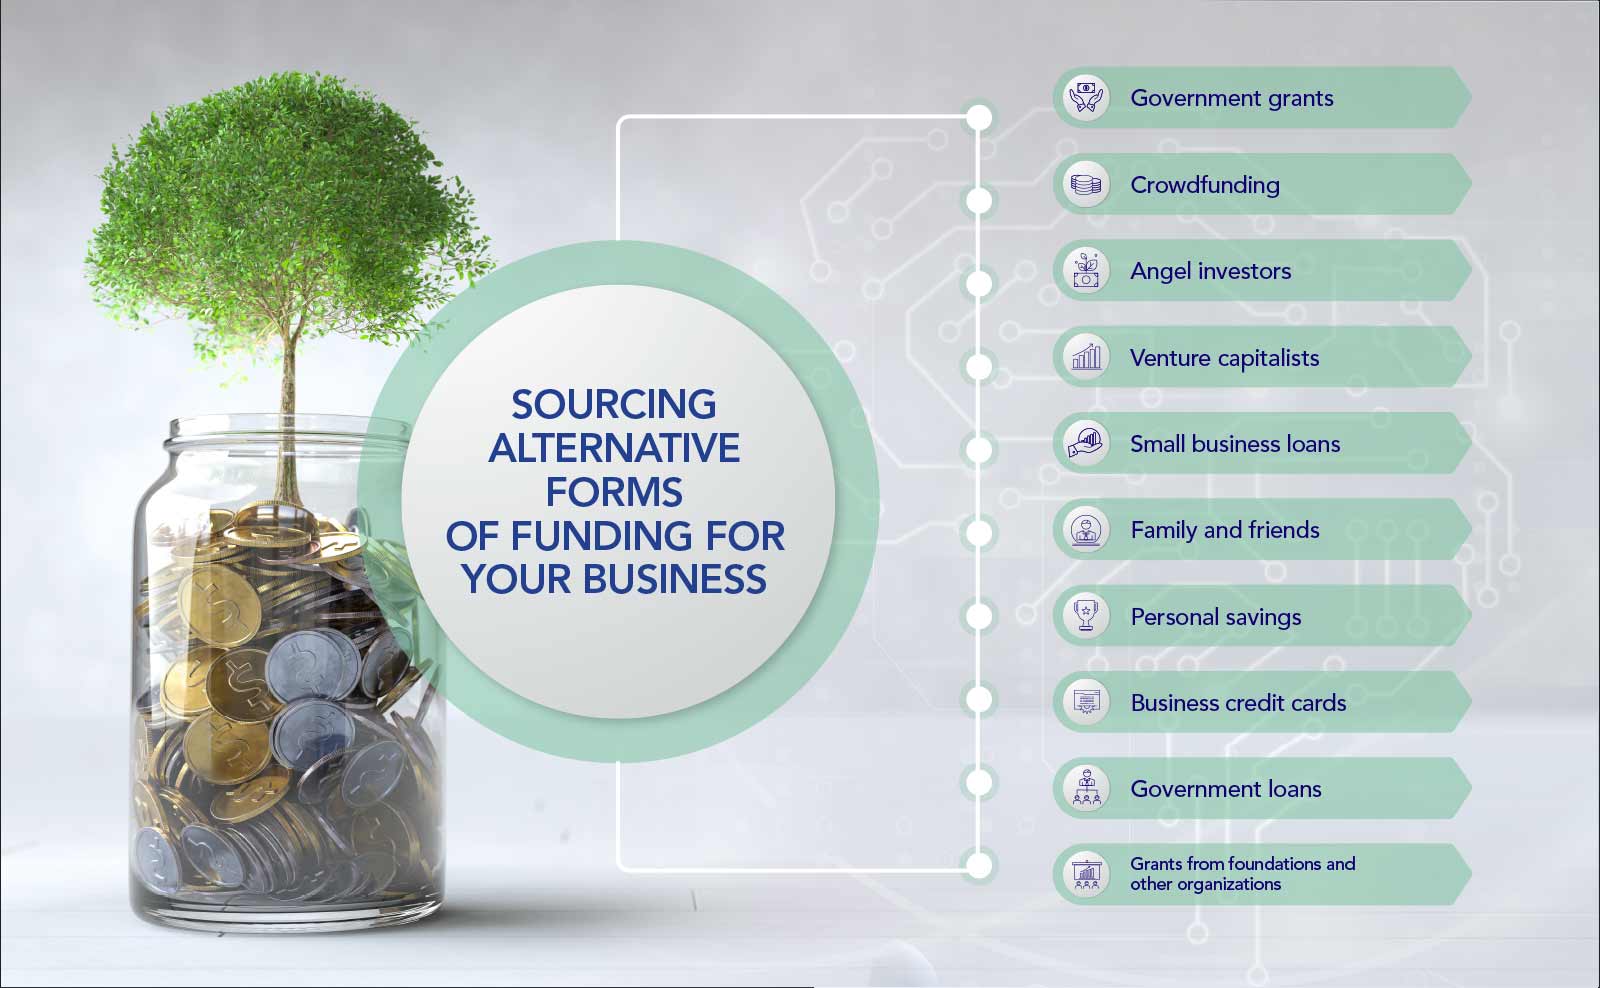 Sourcing alternative forms of funding for your business